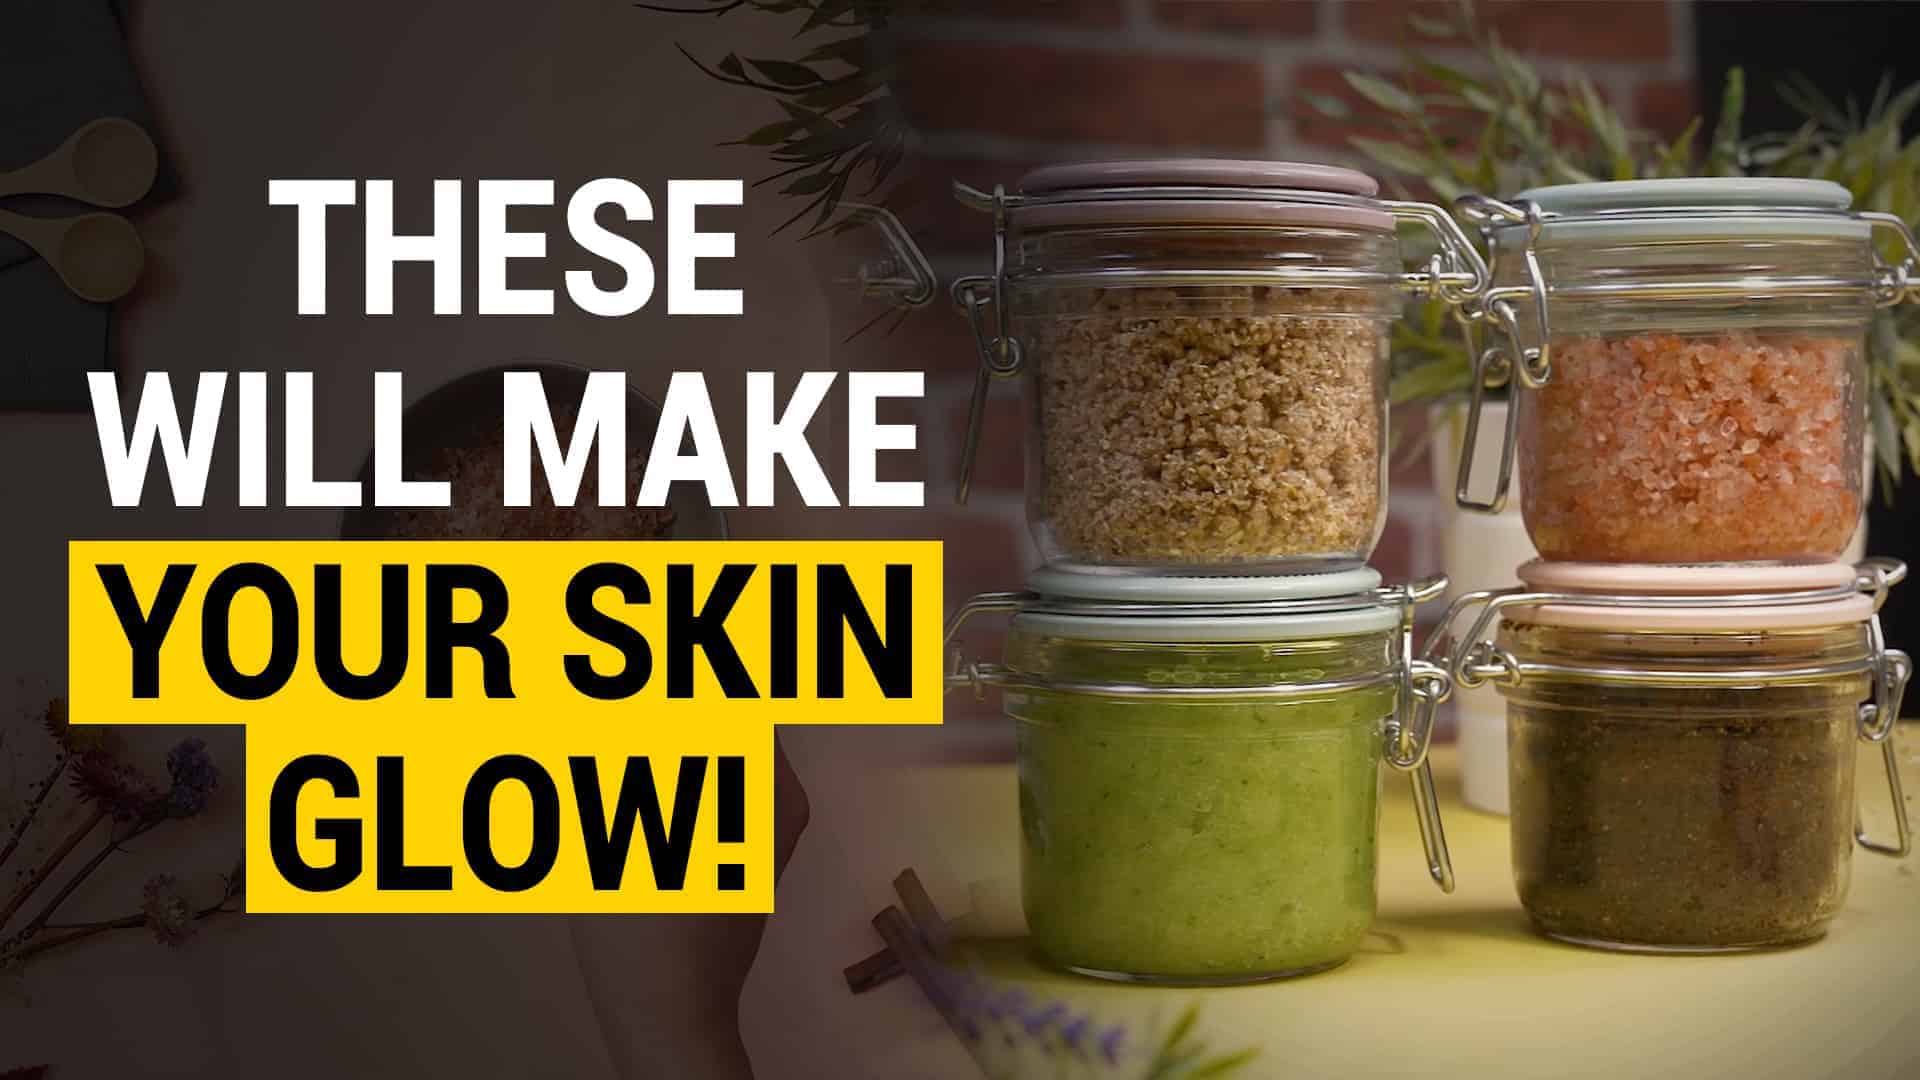 These 6 Homemade Body Scrubs Will Make Your Skin Glow